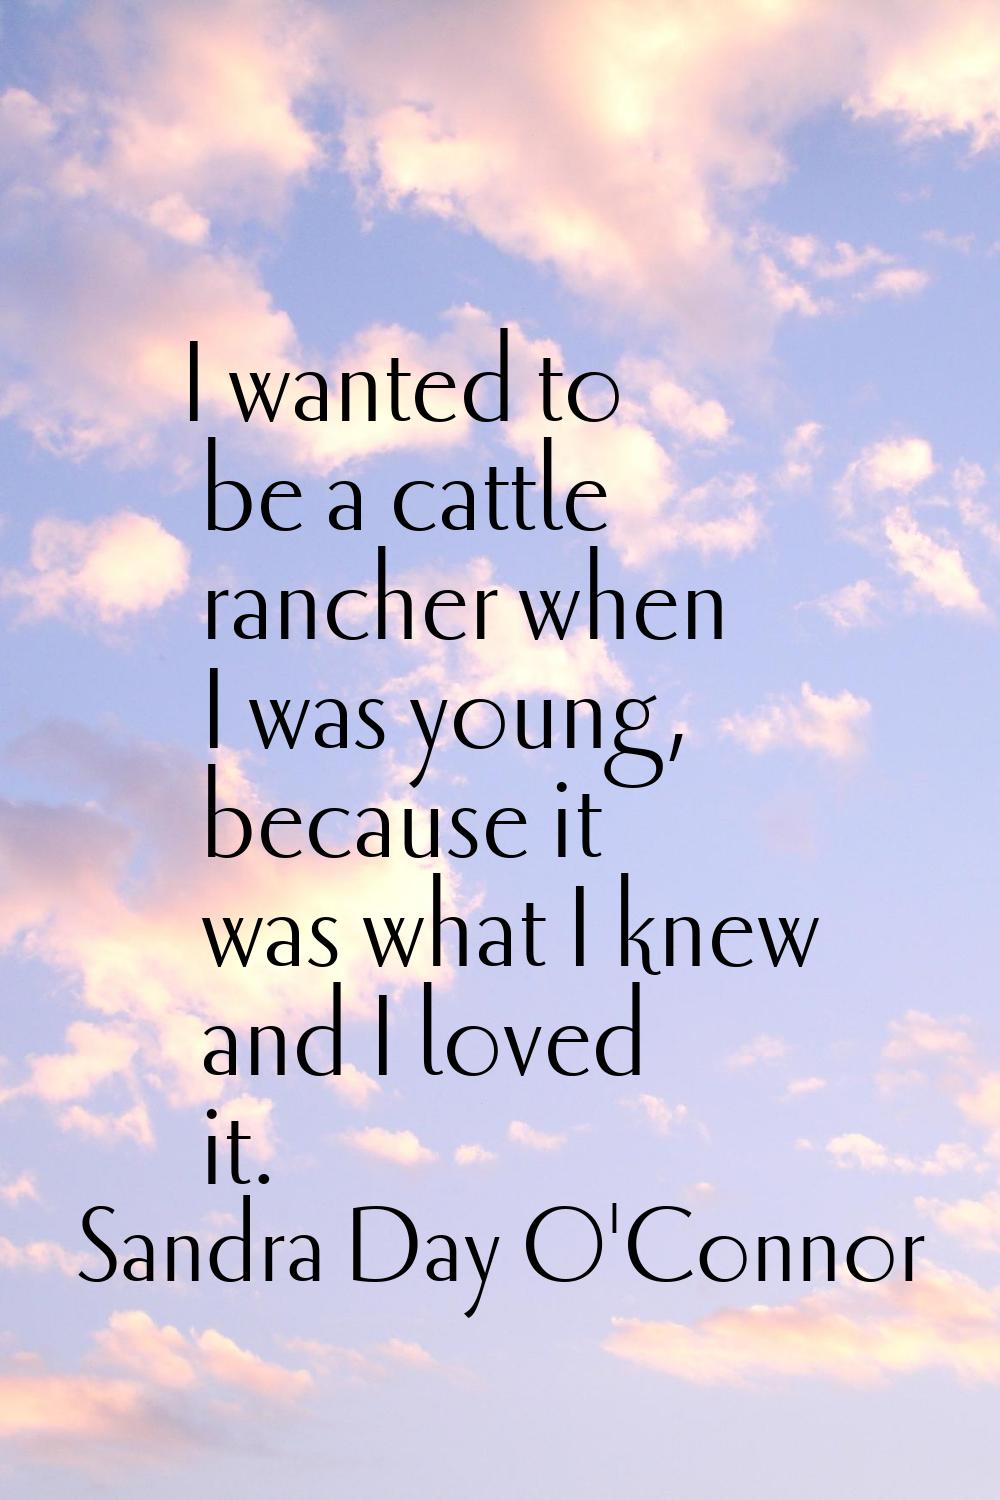 I wanted to be a cattle rancher when I was young, because it was what I knew and I loved it.